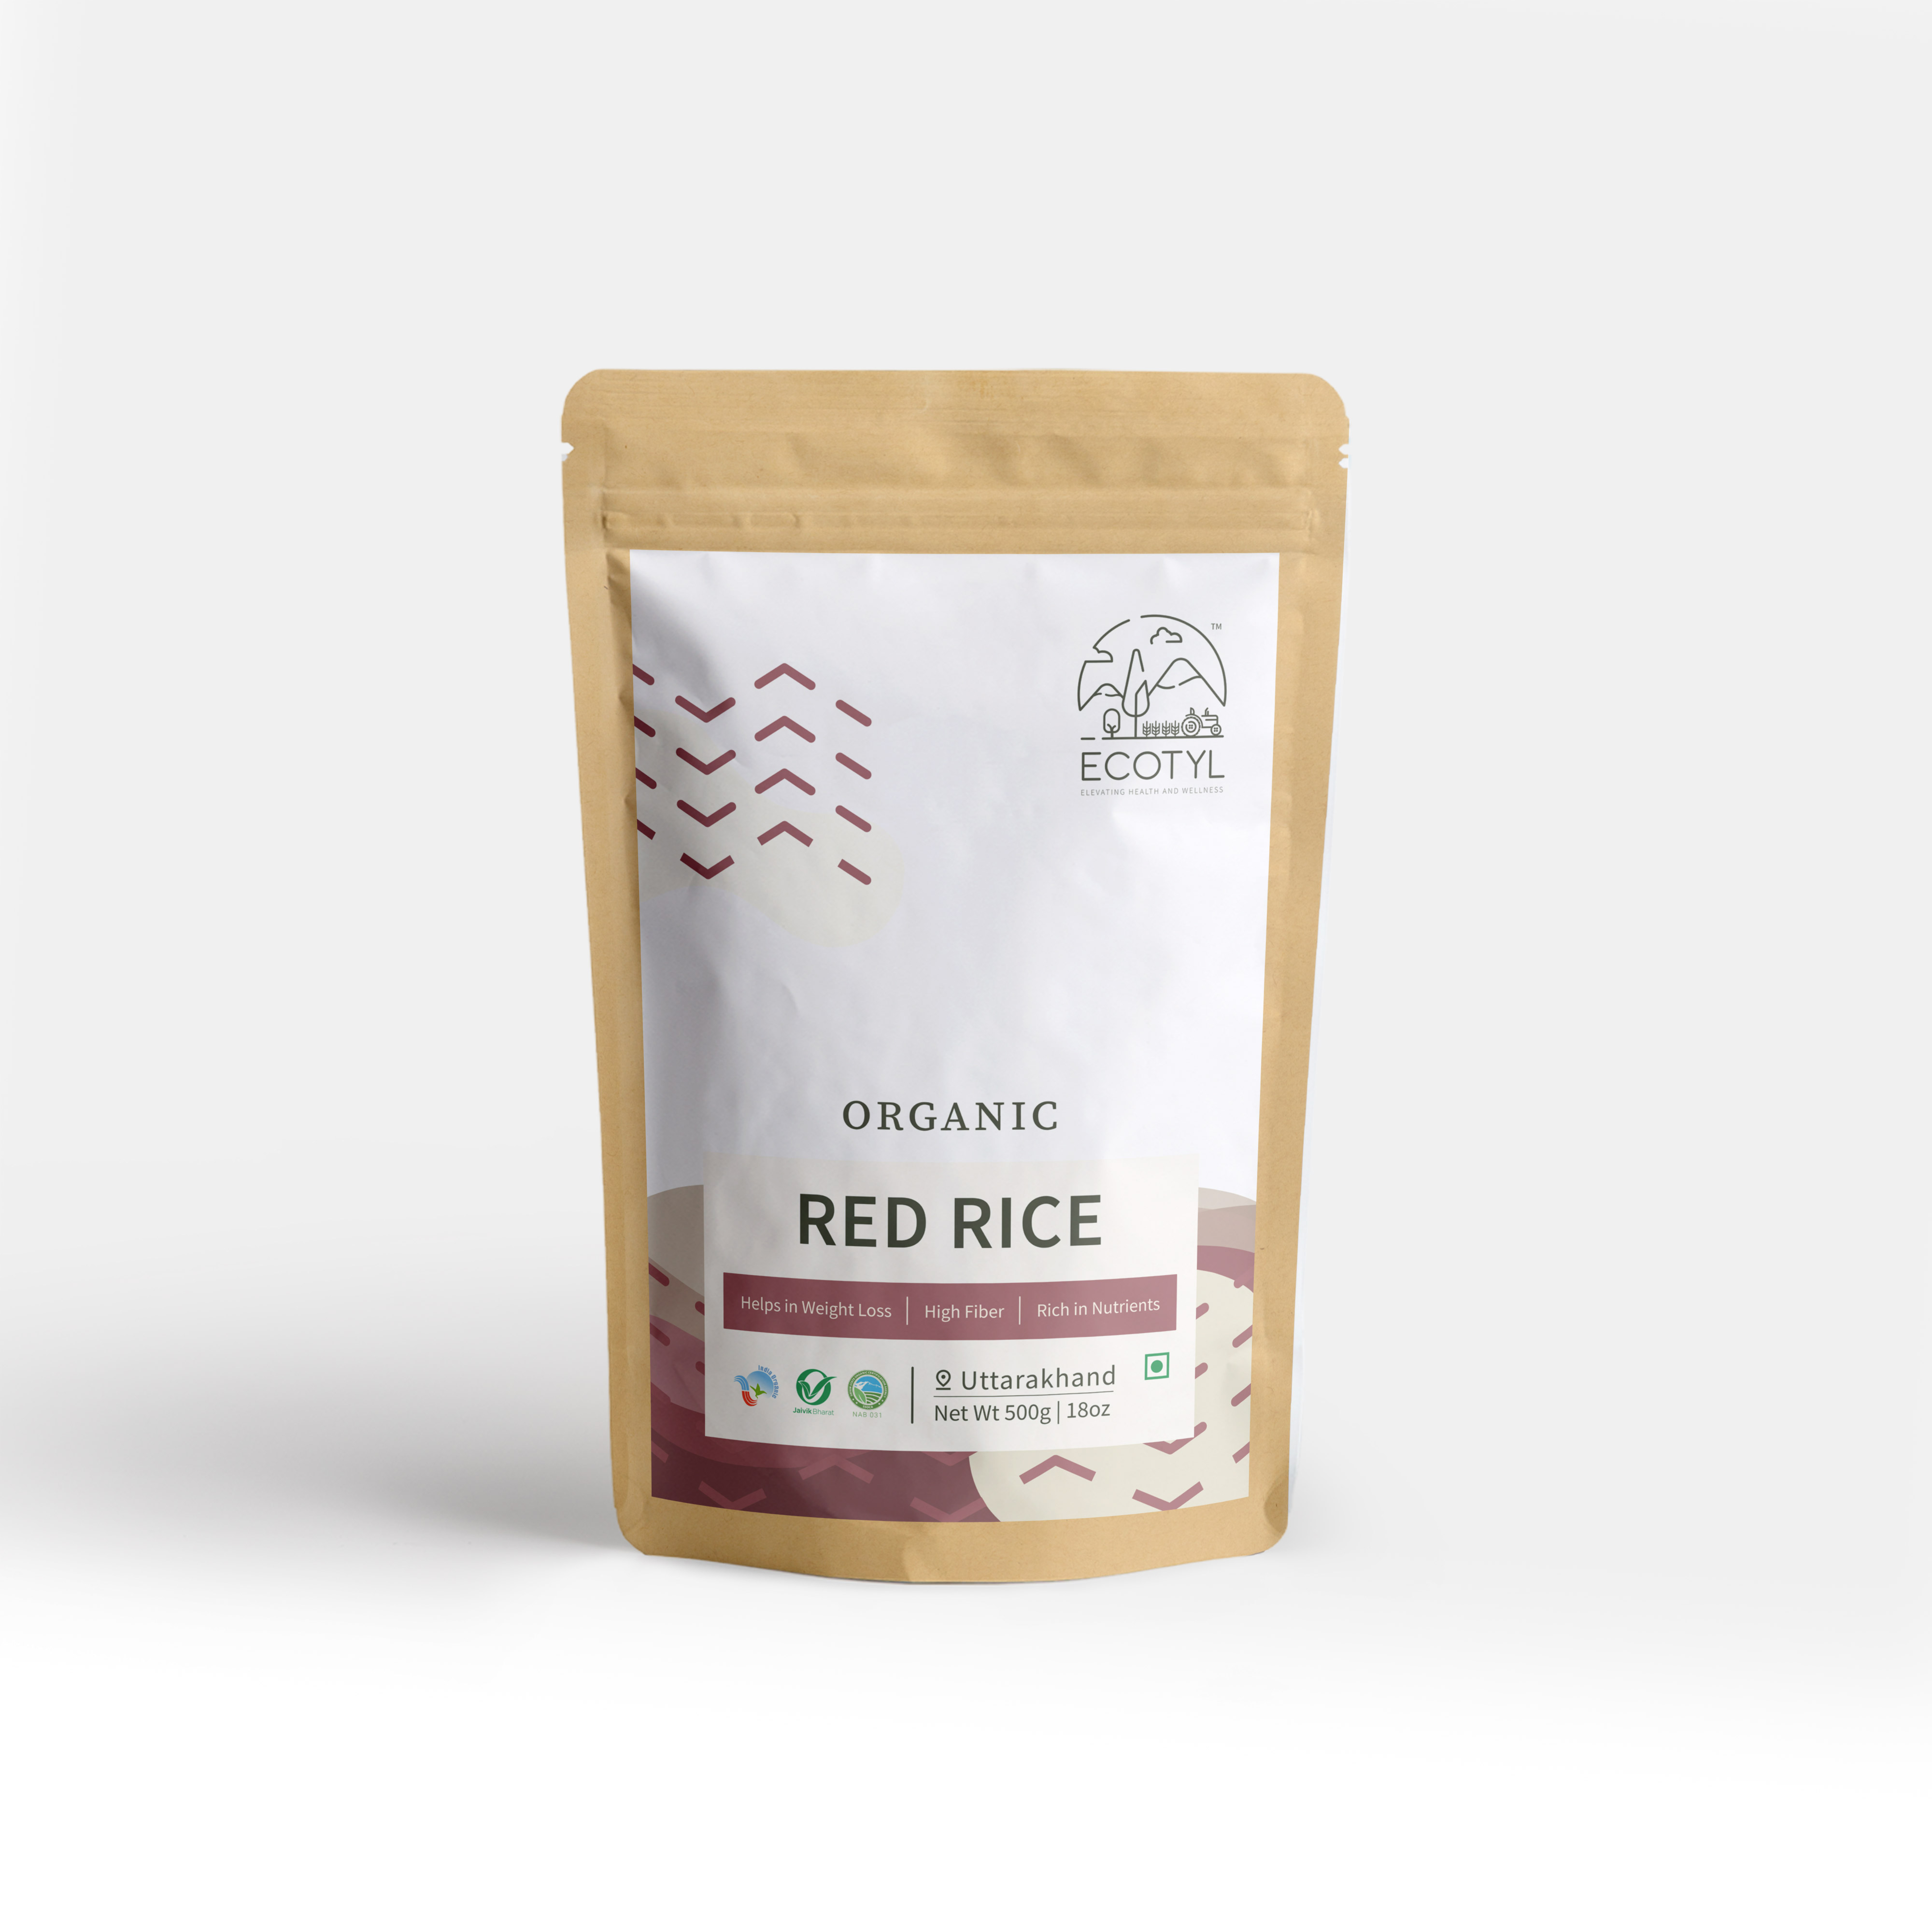 Buy Ecotyl Organic Red Rice - 500 g at Best Price Online